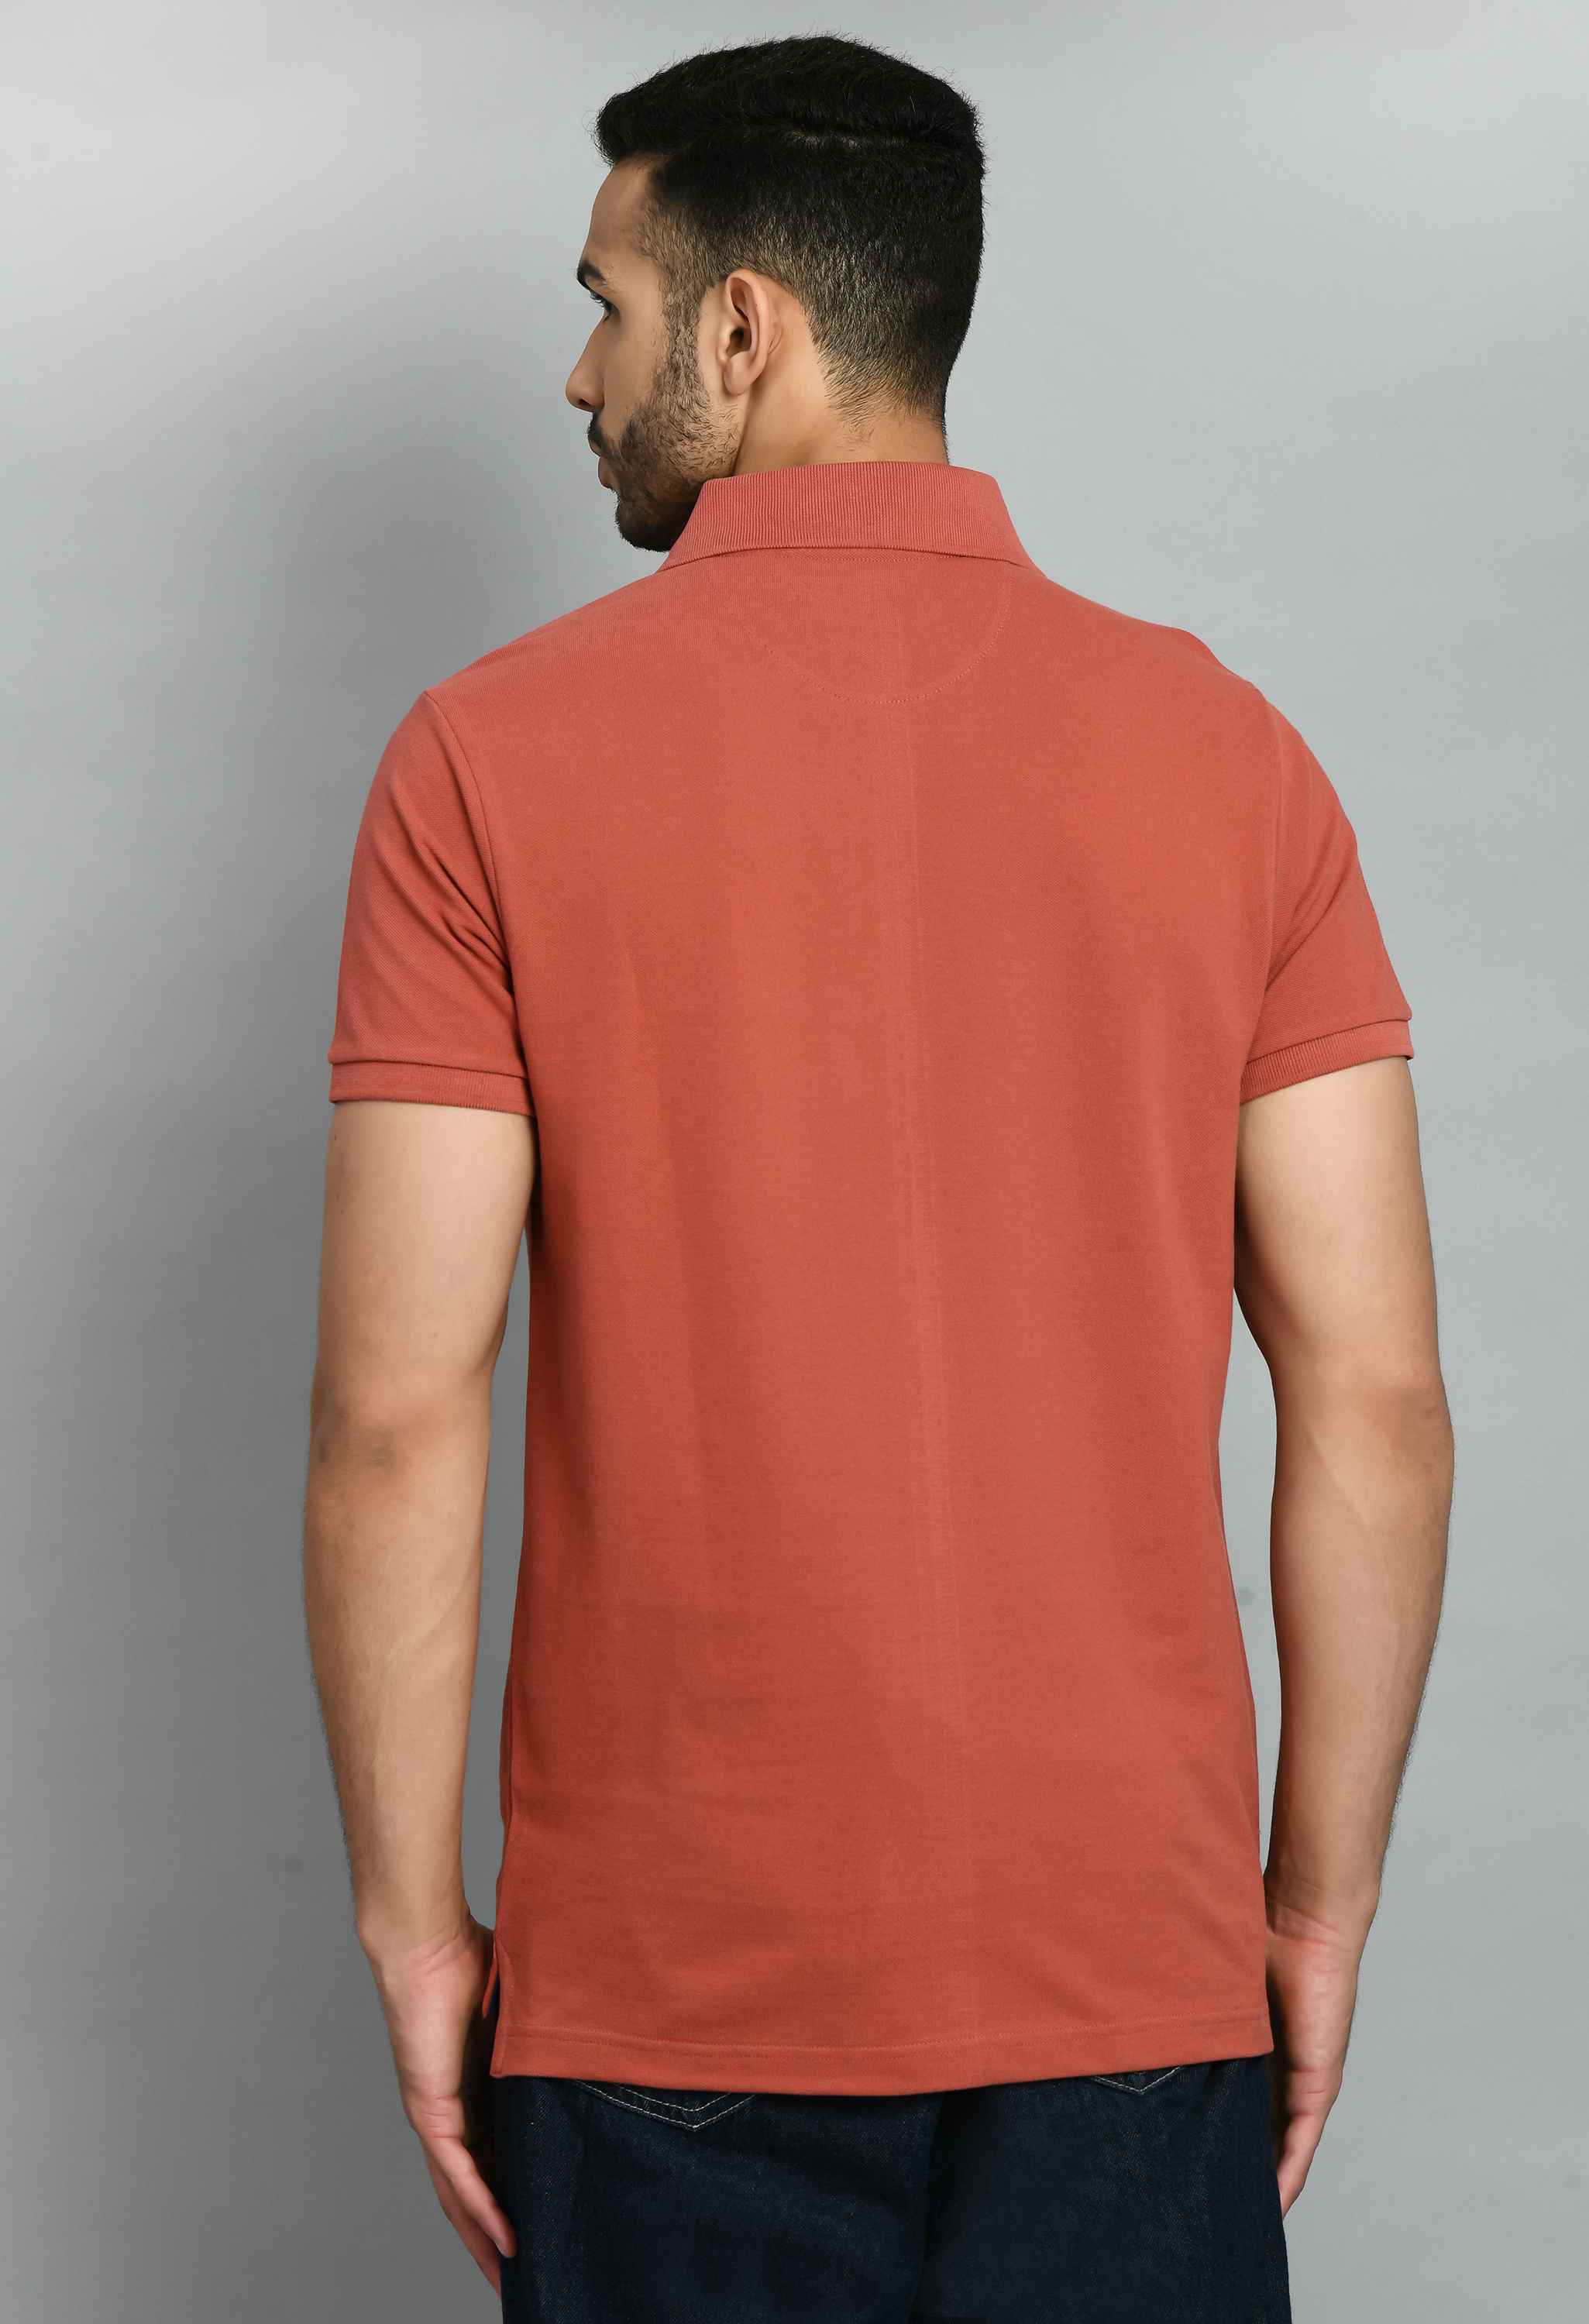 Men's Solid Rust Smart Fit Polo T-Shirt - SQUIREHOOD